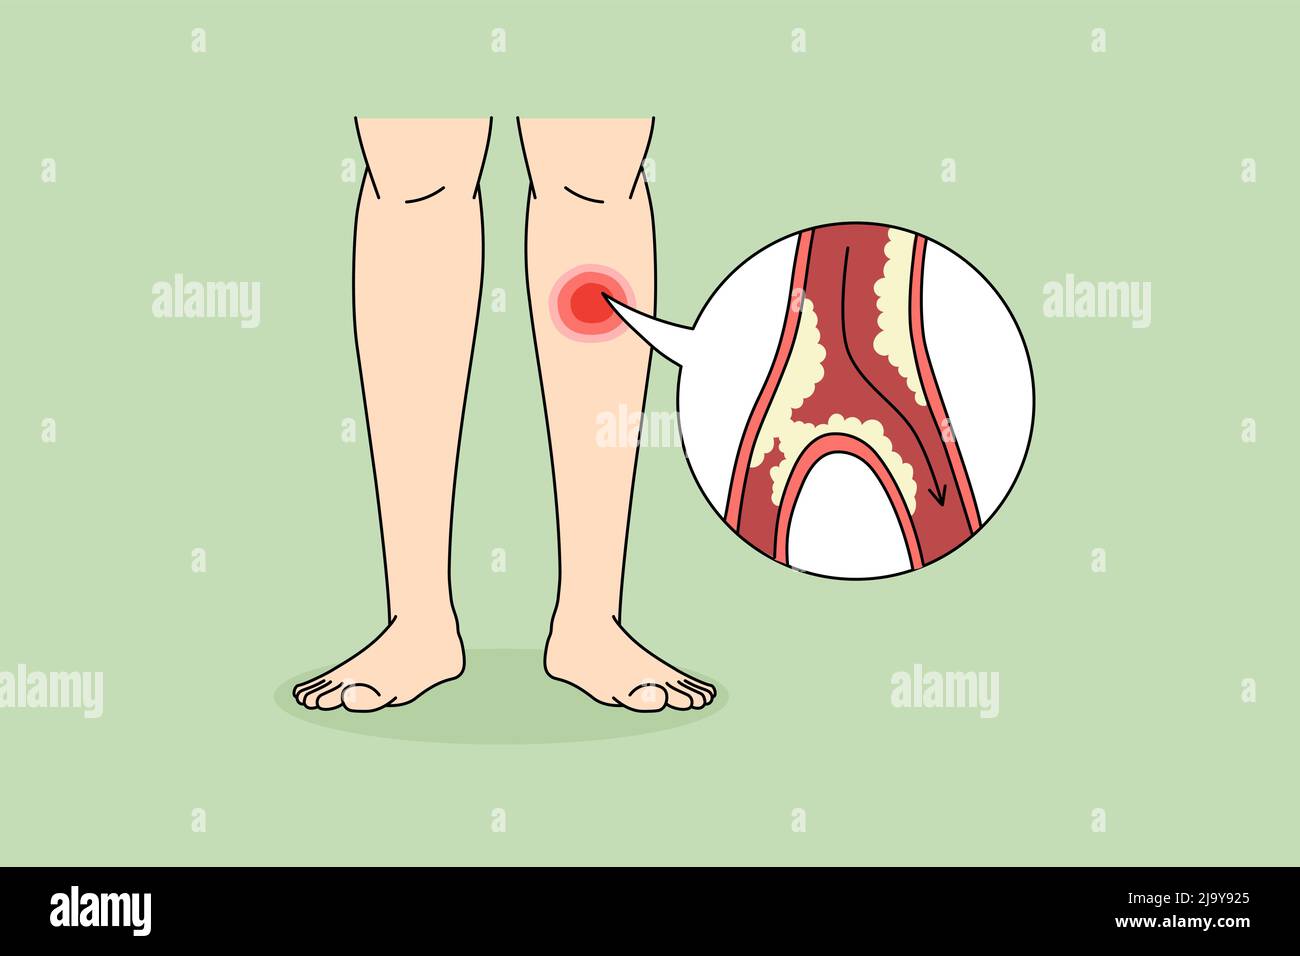 Close up of person suffer from PAD disease having blood vessel blockage in legs. Man struggle with clotted limbs from veins narrowing or blocking. Healthcare concept. Vector illustration.  Stock Vector